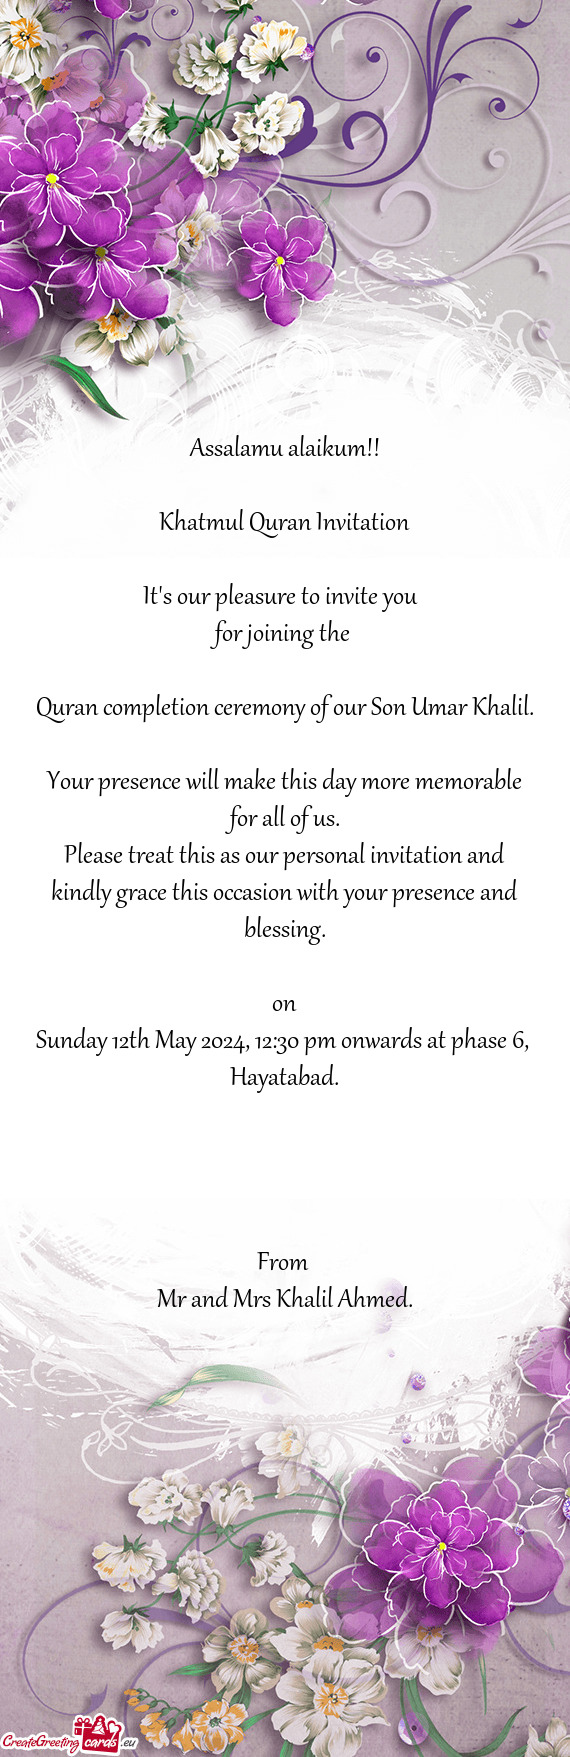 Quran completion ceremony of our Son Umar Khalil